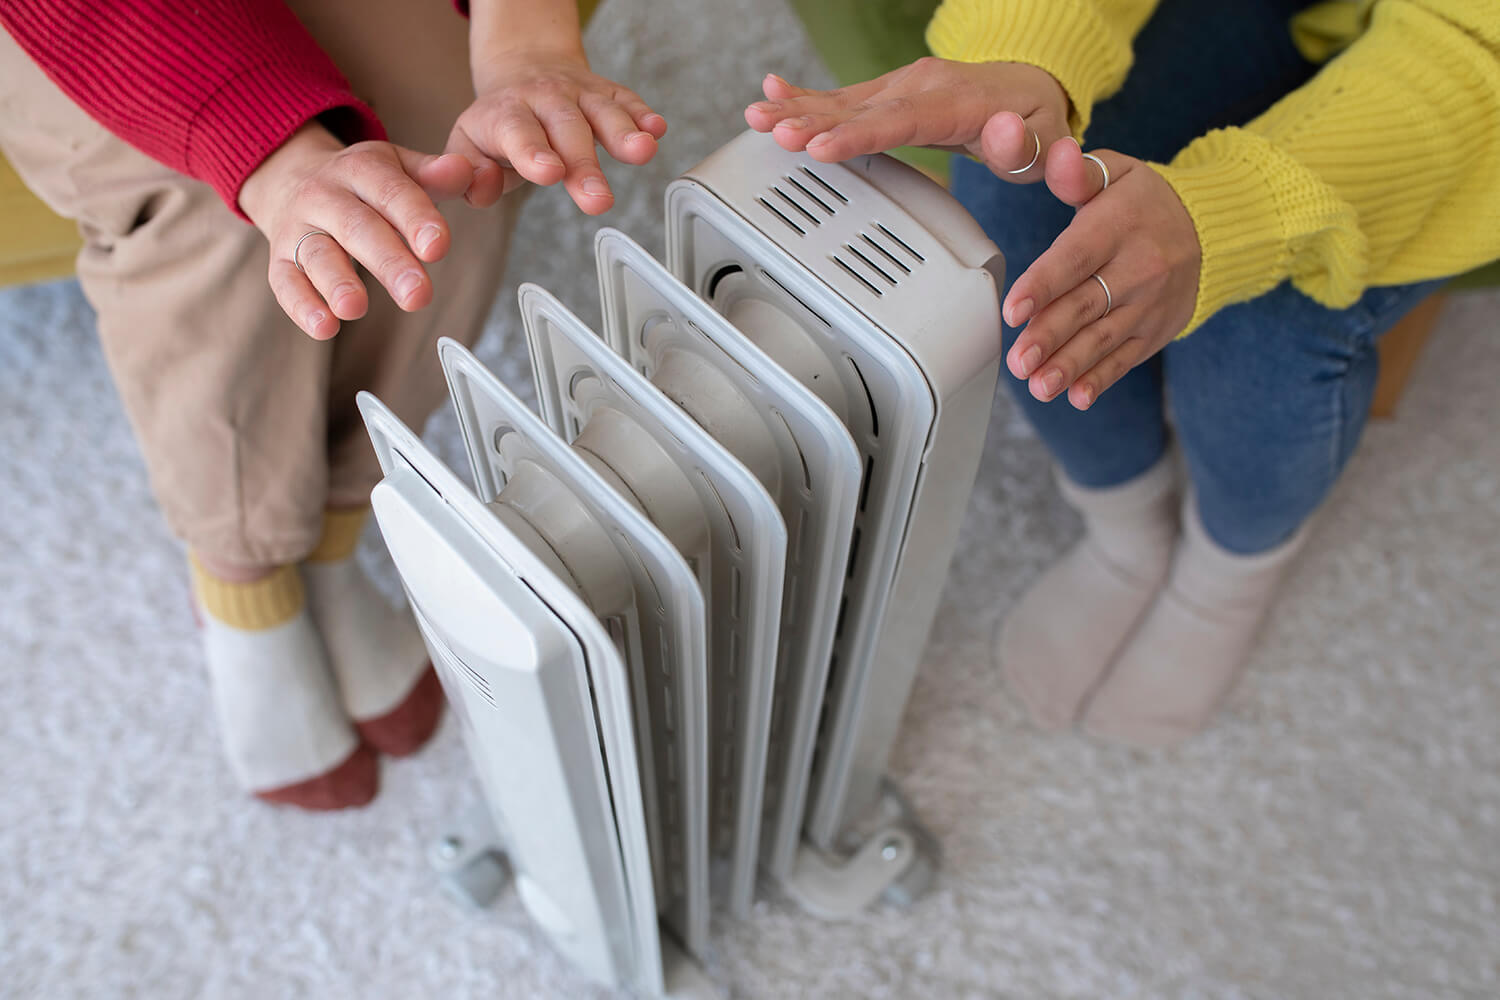 Heating and Air Conditioning air volume sizing is critical